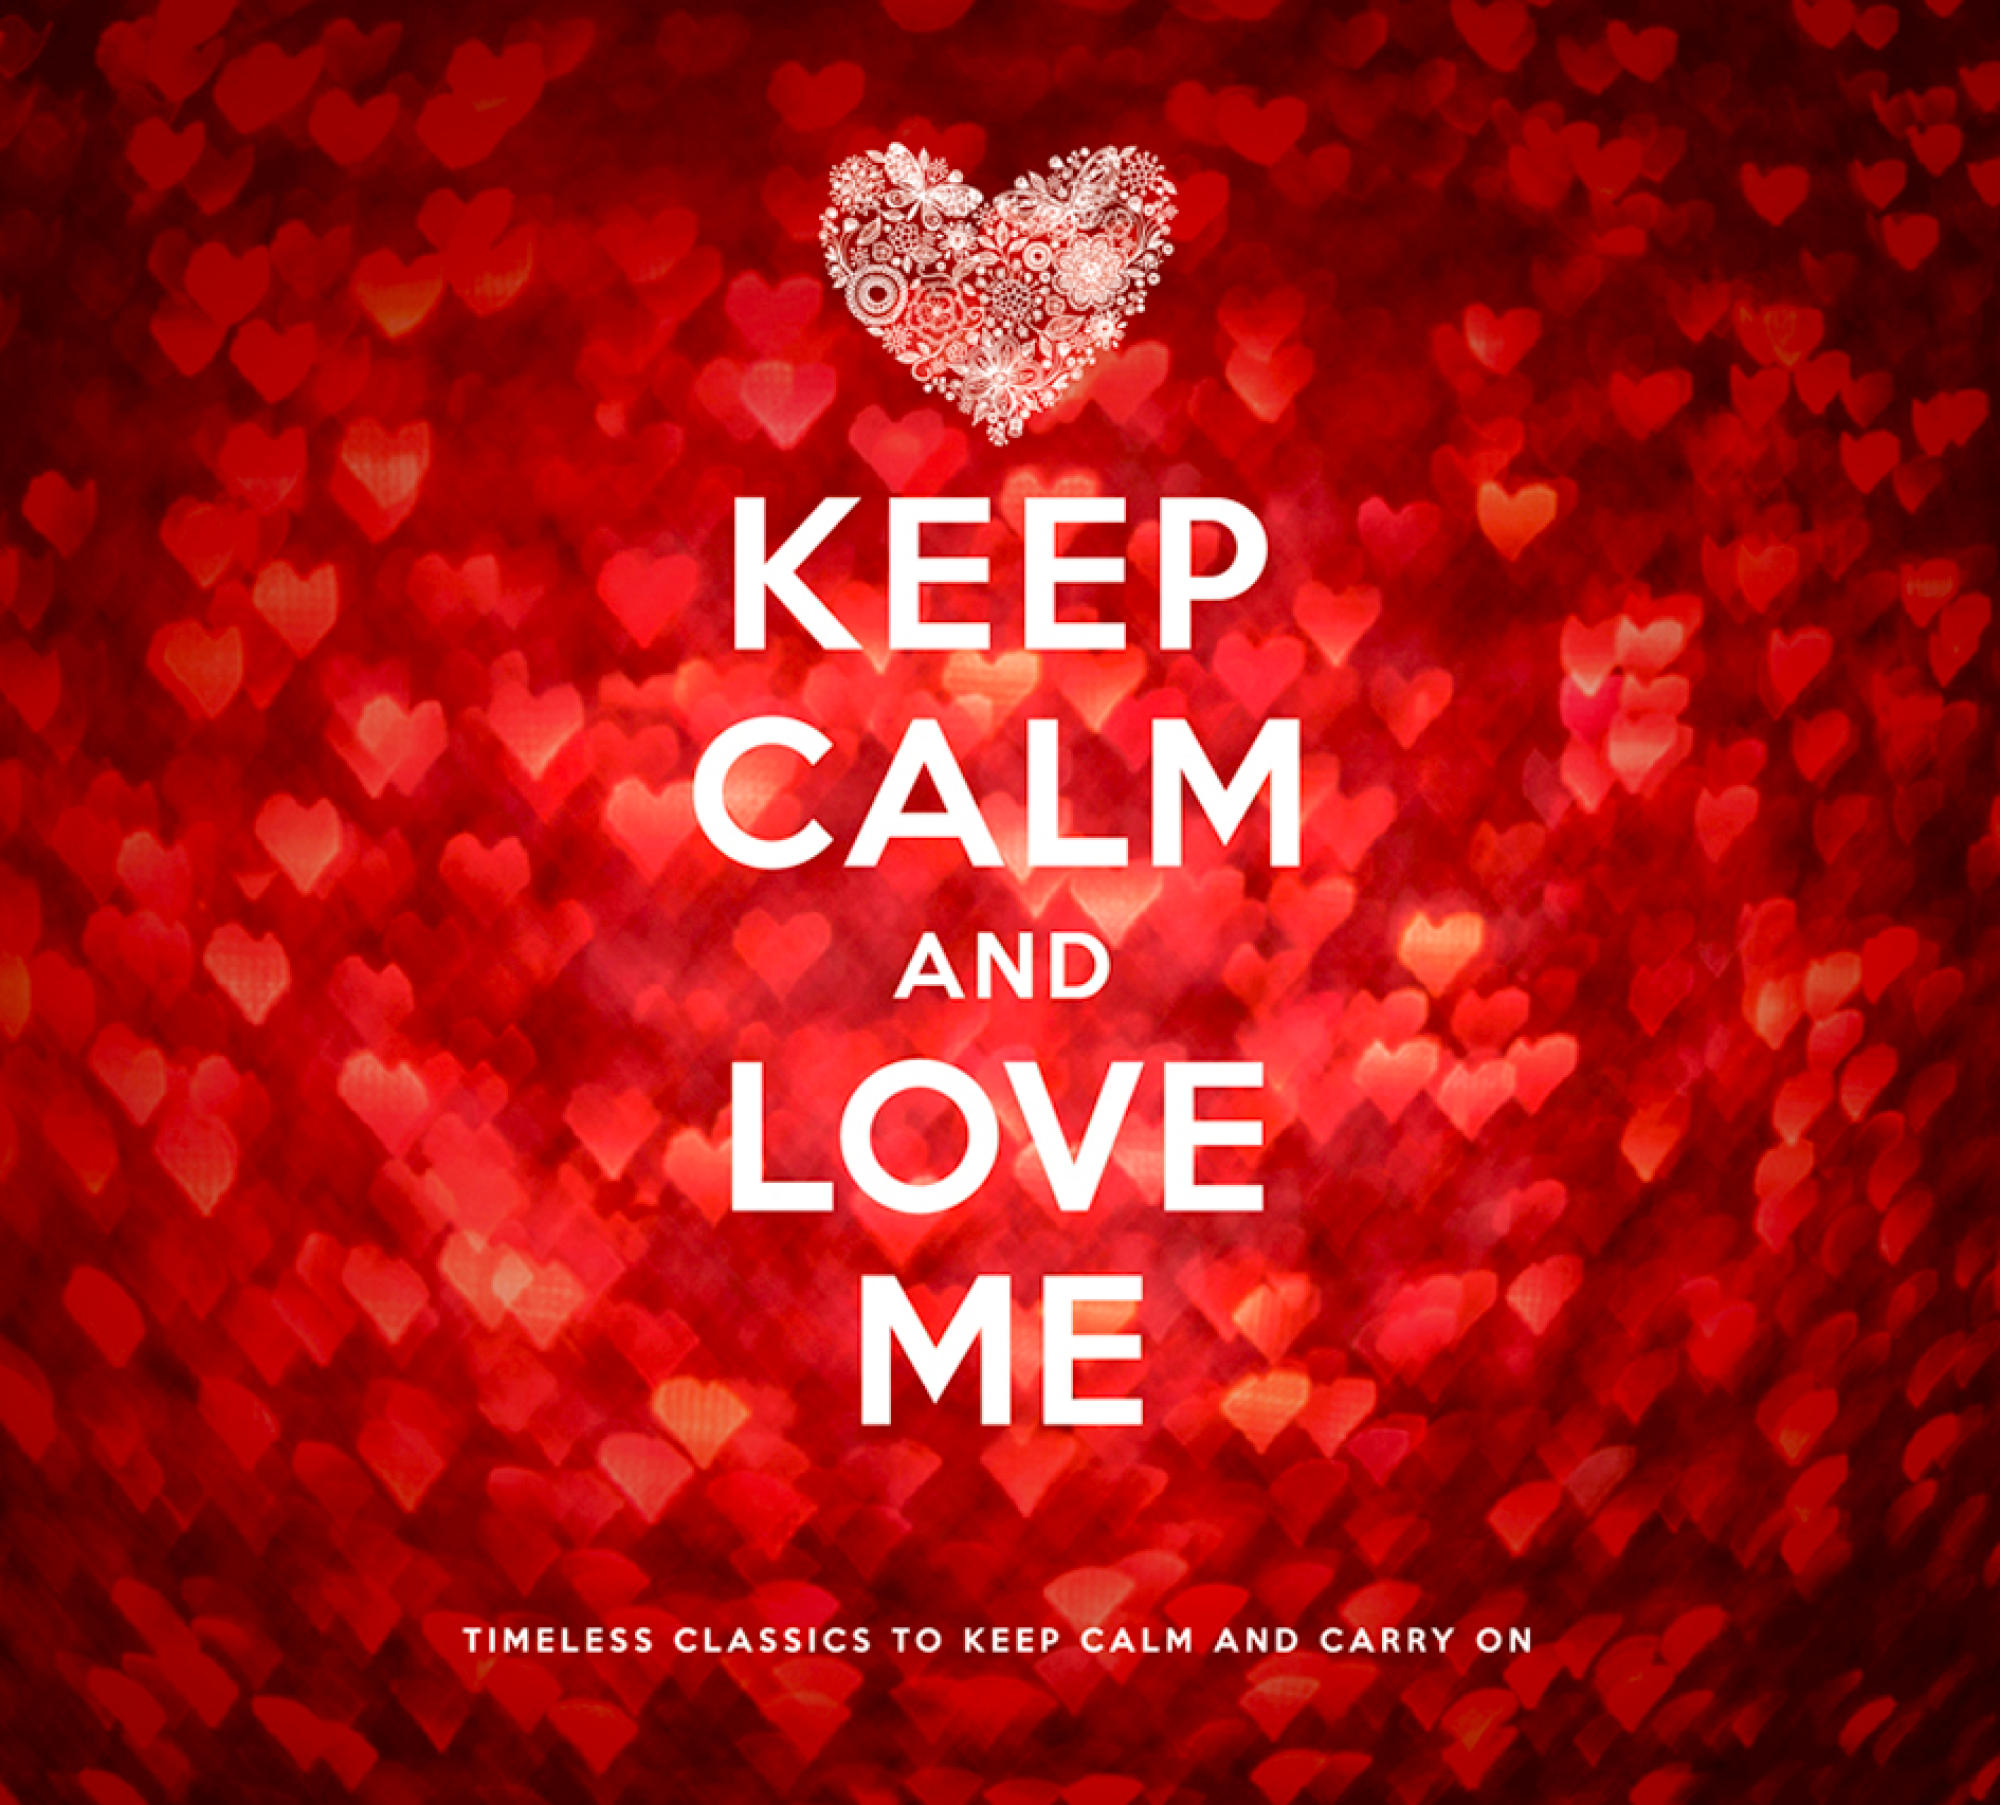 VARIOUS - Keep And Me (CD) Love - Calm